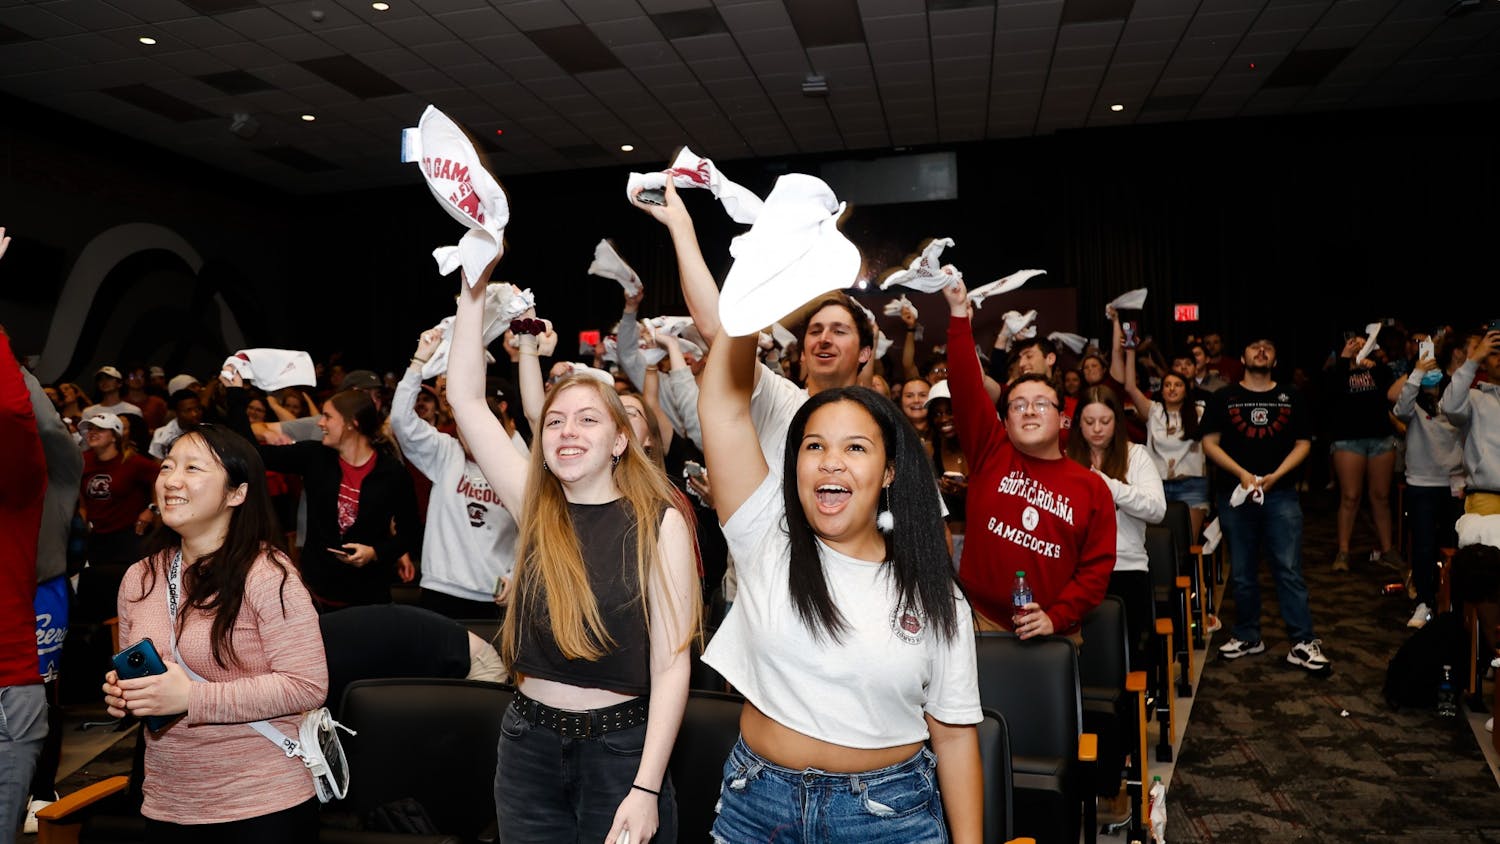 Students cheer and wave their rally towels in the Russell House theater after the women’s basketball team beats the University of Connecticut in the NCAA championship game on April 3, 2022, in Columbia, SC.